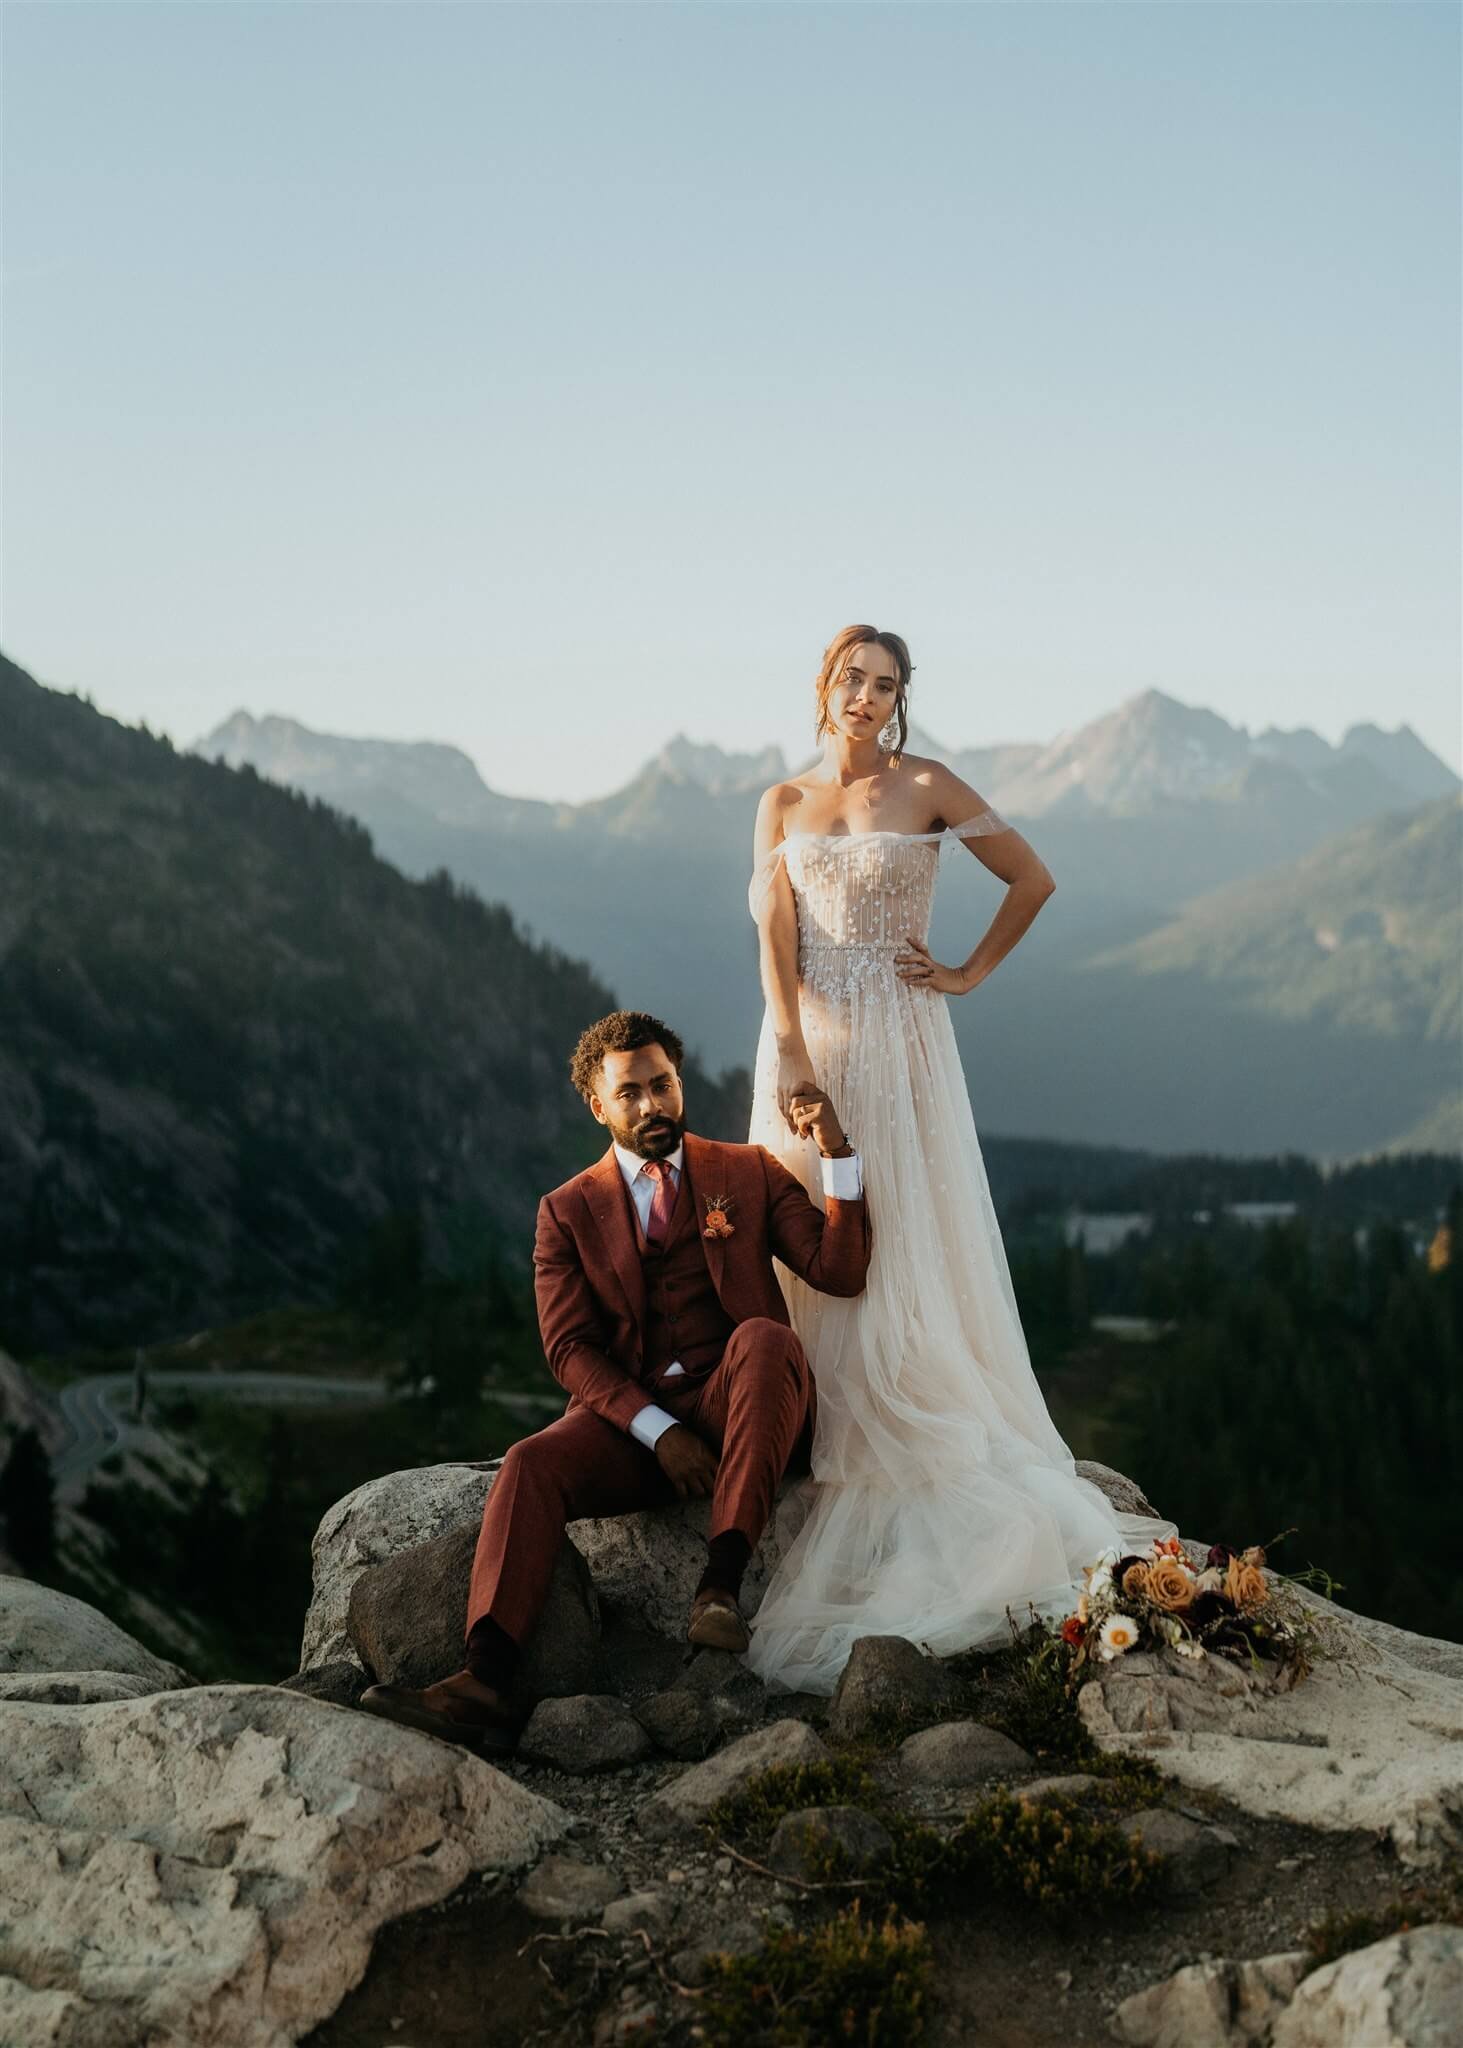 Bride and groom portrait photos at mountain elopement in Washington